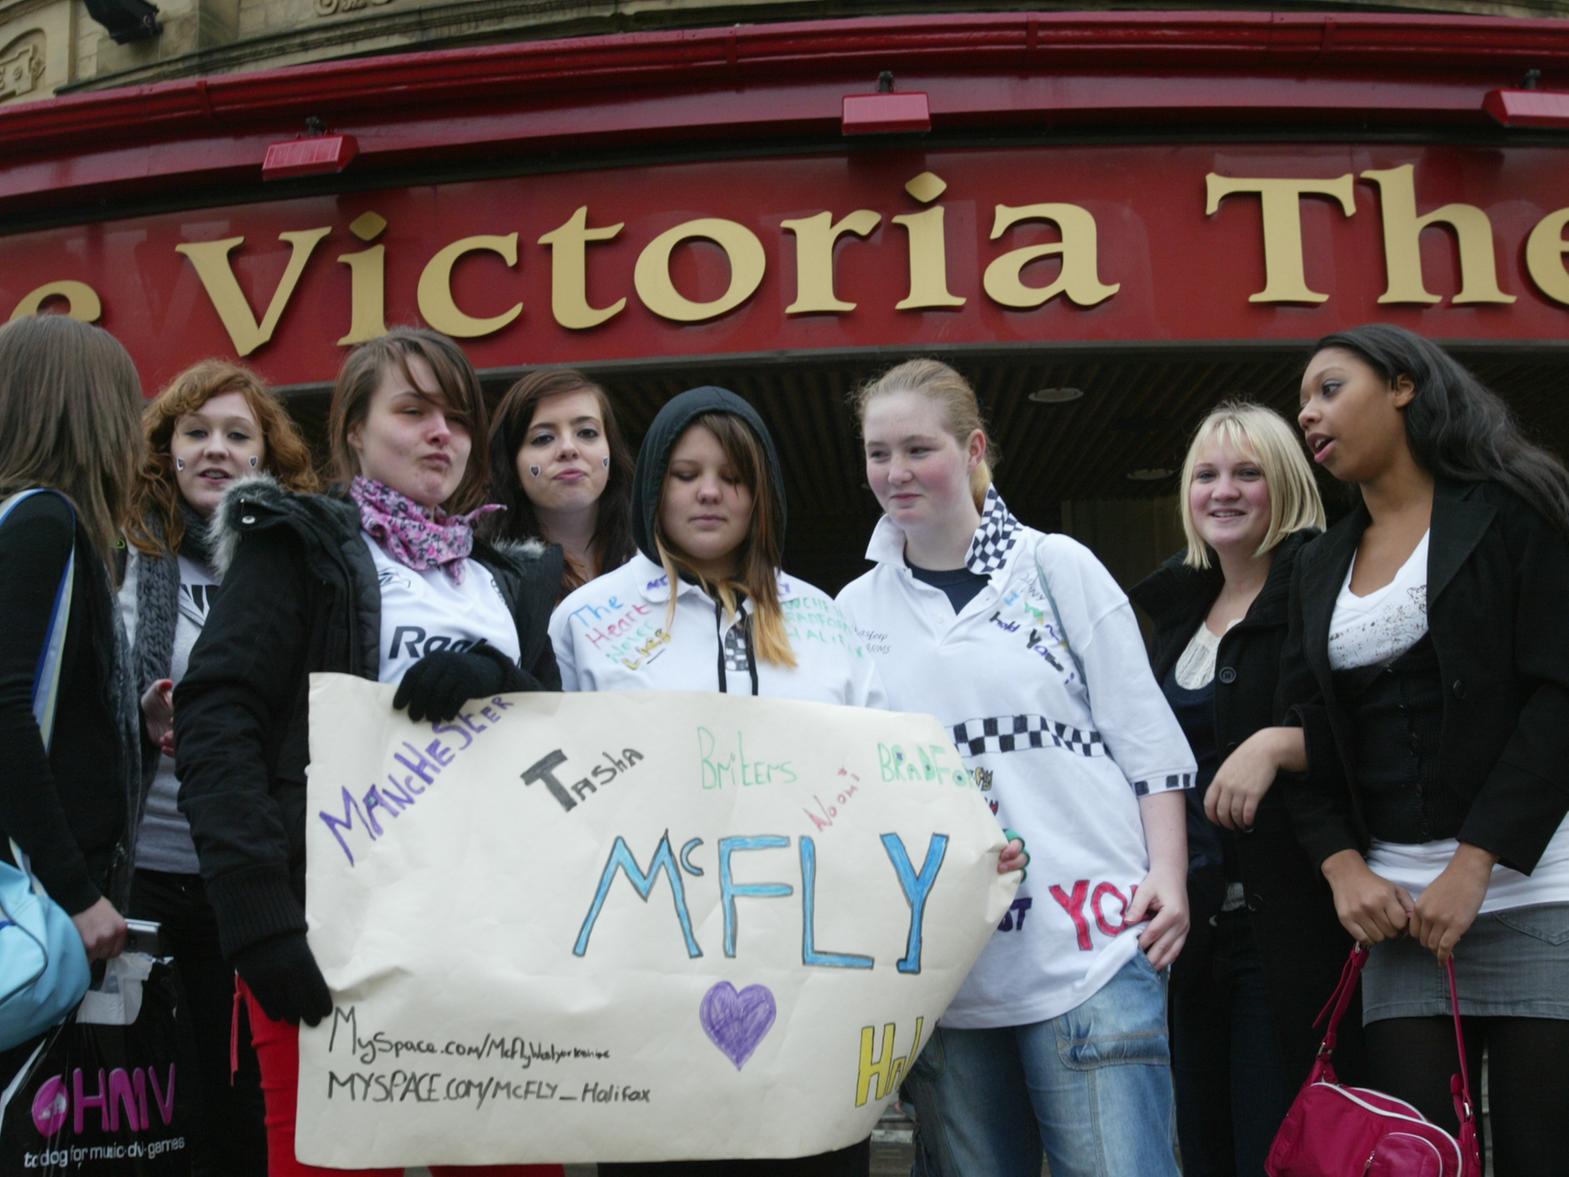 Pop band McFly were supposed to perform at the Victoria Theatre back in 2007 but due to illness the concert was cancelled at short notice. This left angry teenage fans waiting outside the venue to be picked up by their parents.